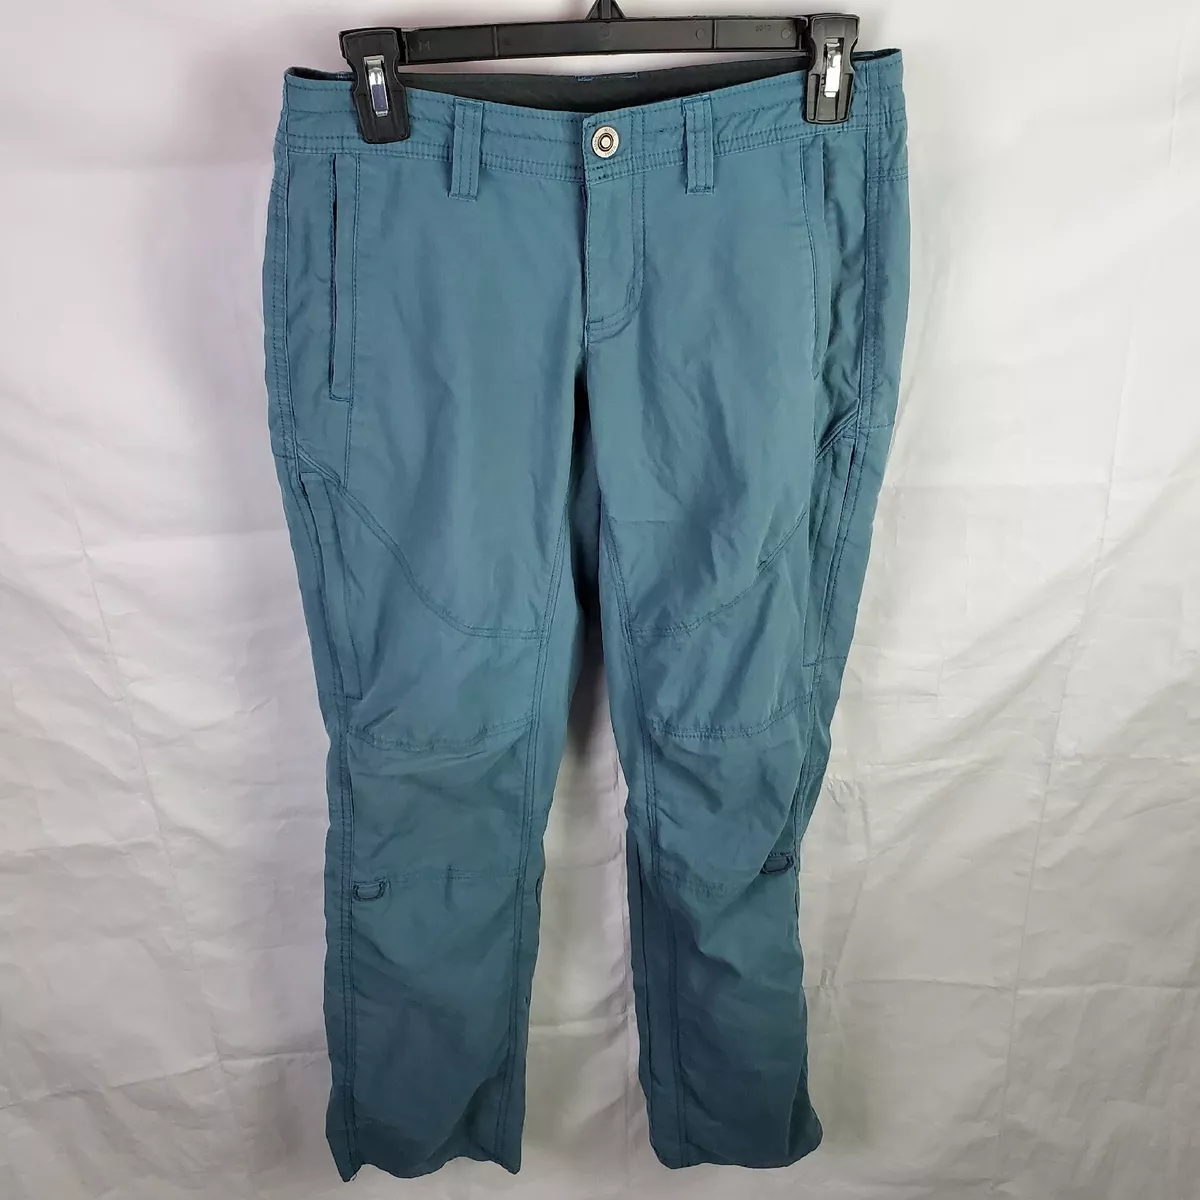 Kuhl Spire Roll Up Pants Hiking Pockets Style 6279 Blue Women's 4 Short